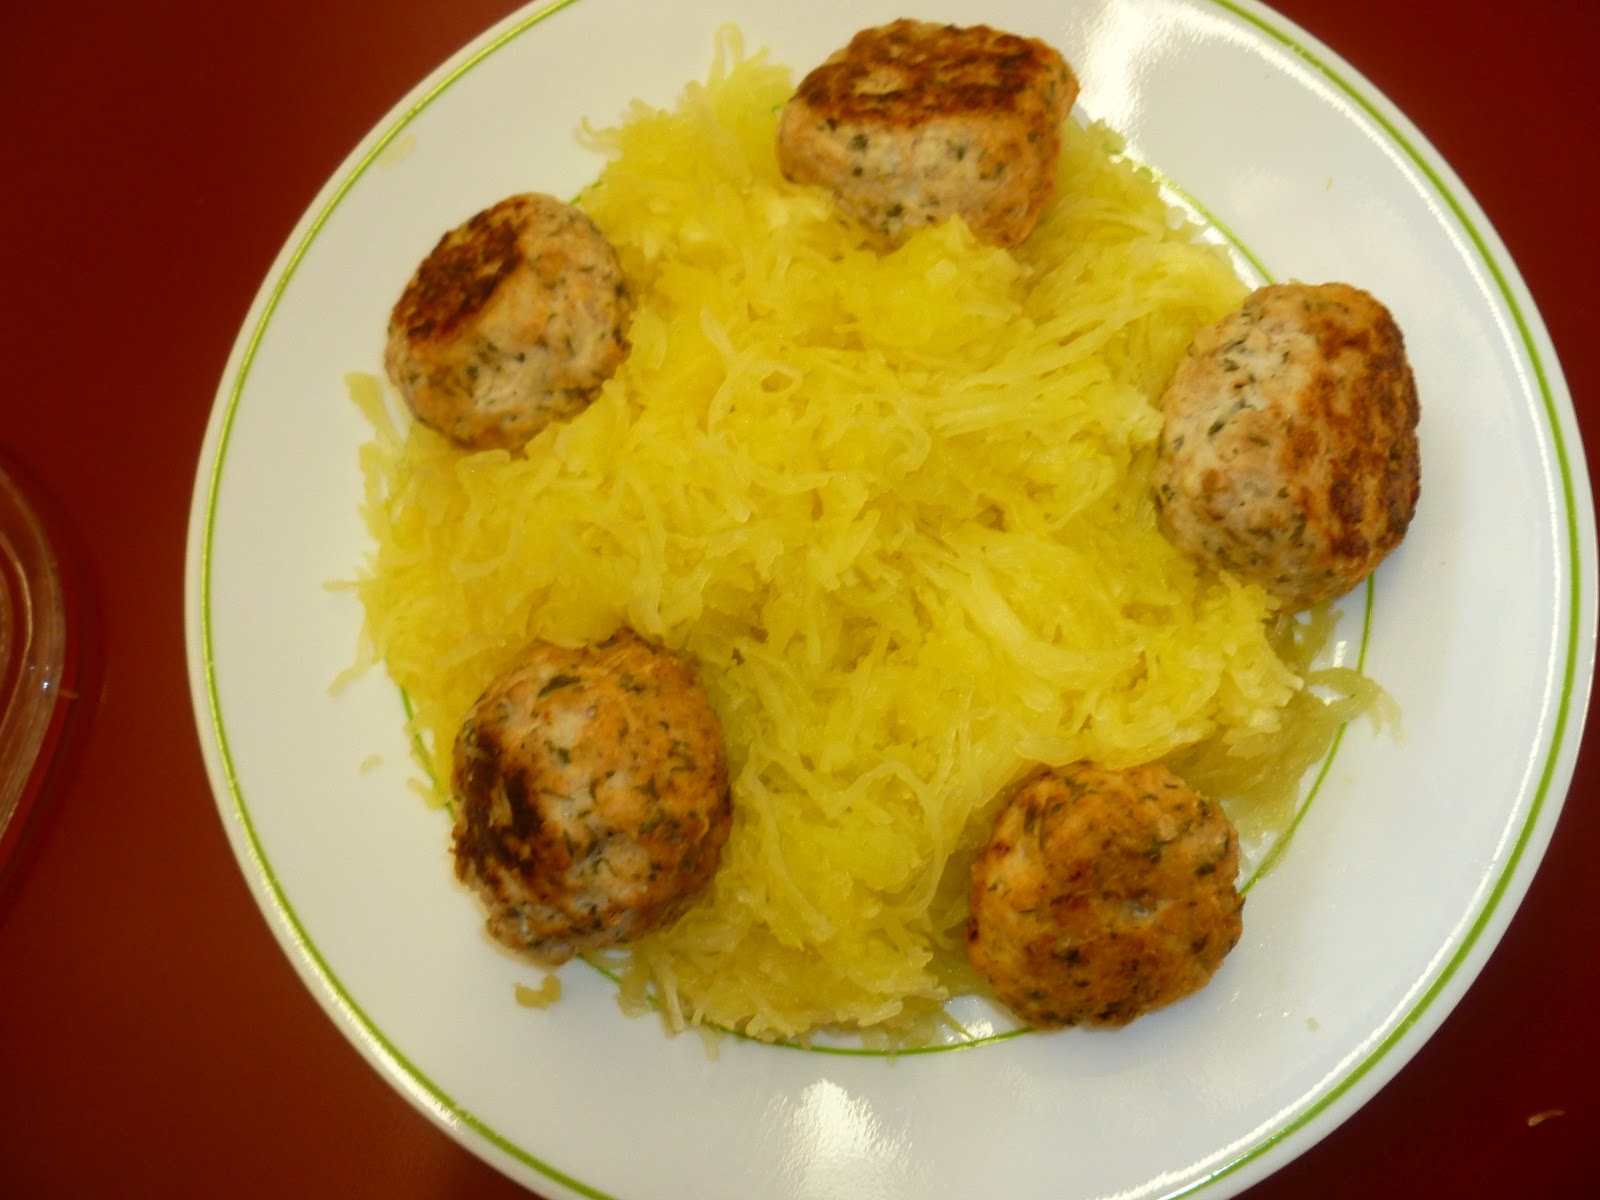 , Spaghetti Squash with Alfredo Sauce and Meatballs, Growing in Grace